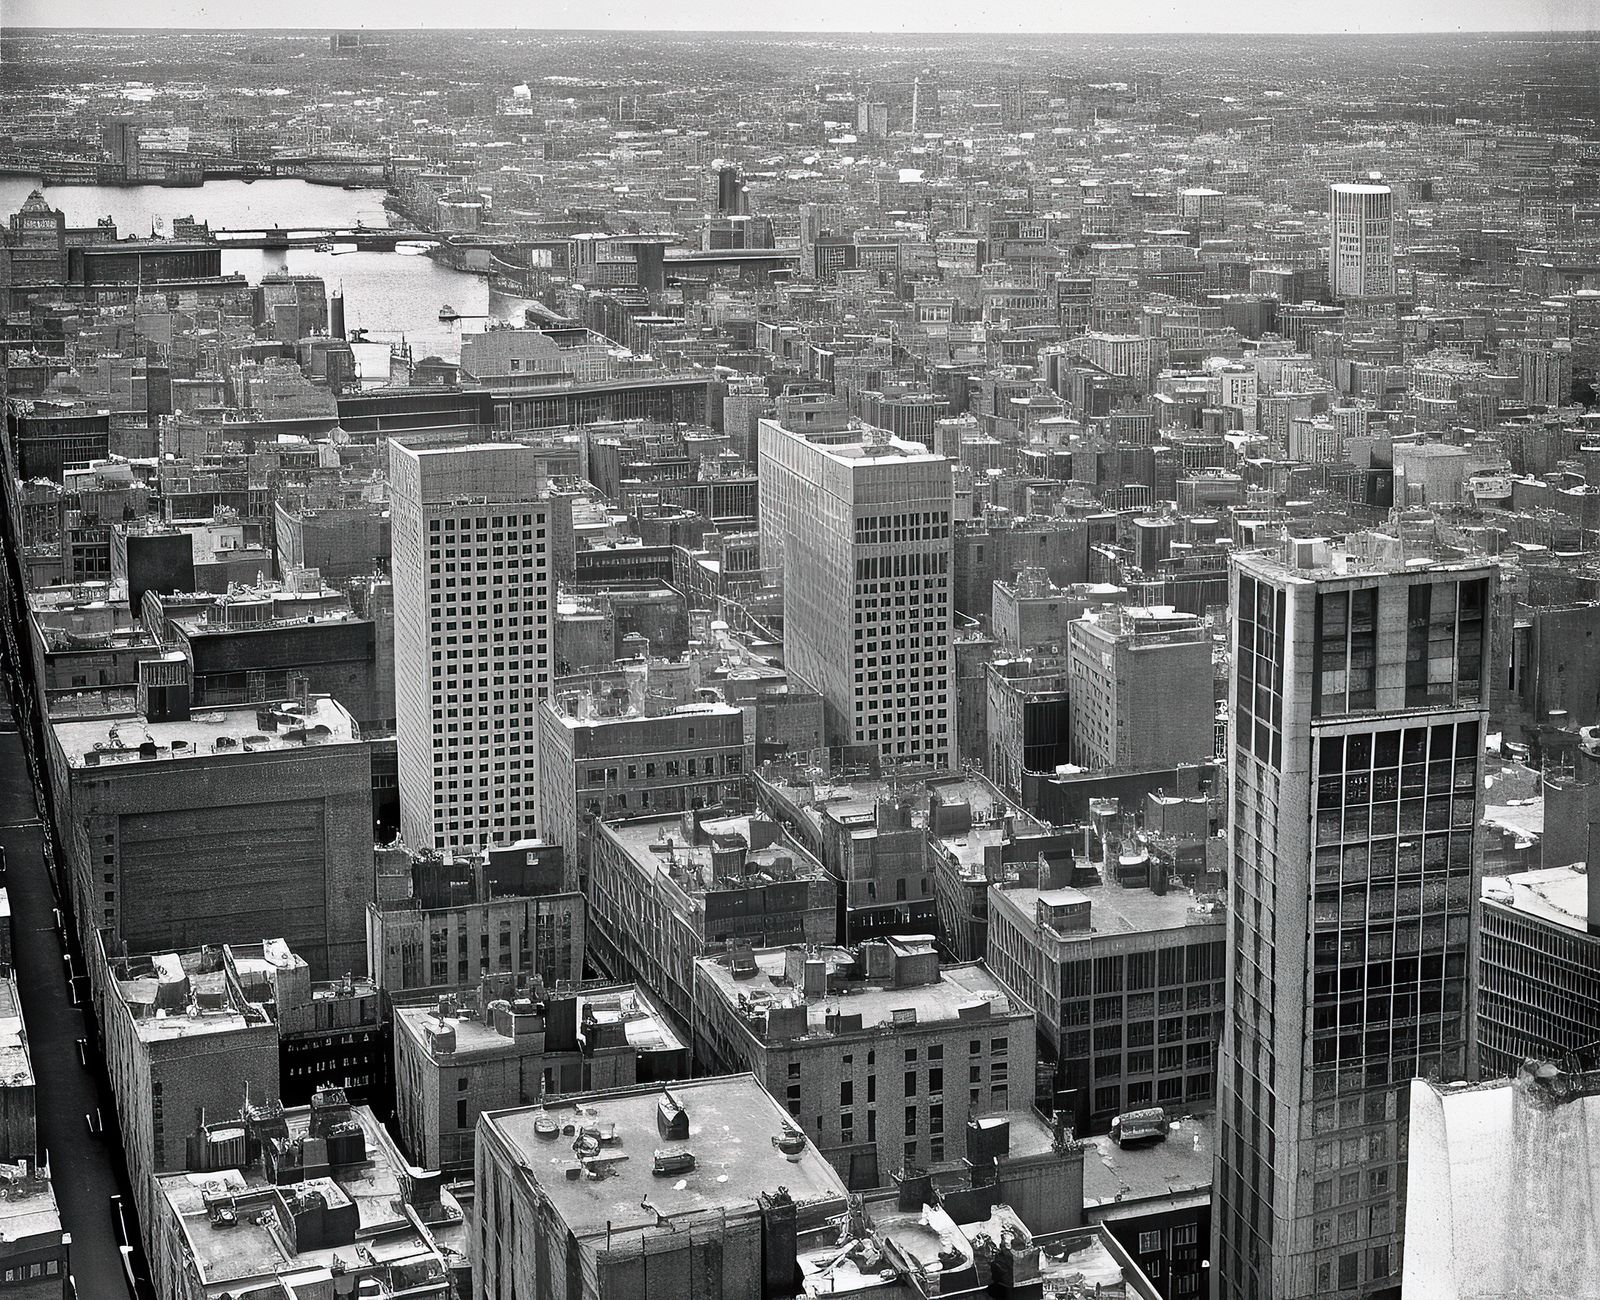 © Craig Ames - View North from the Prudential Building, Boston. (Possibly After Nicholas Nixon)